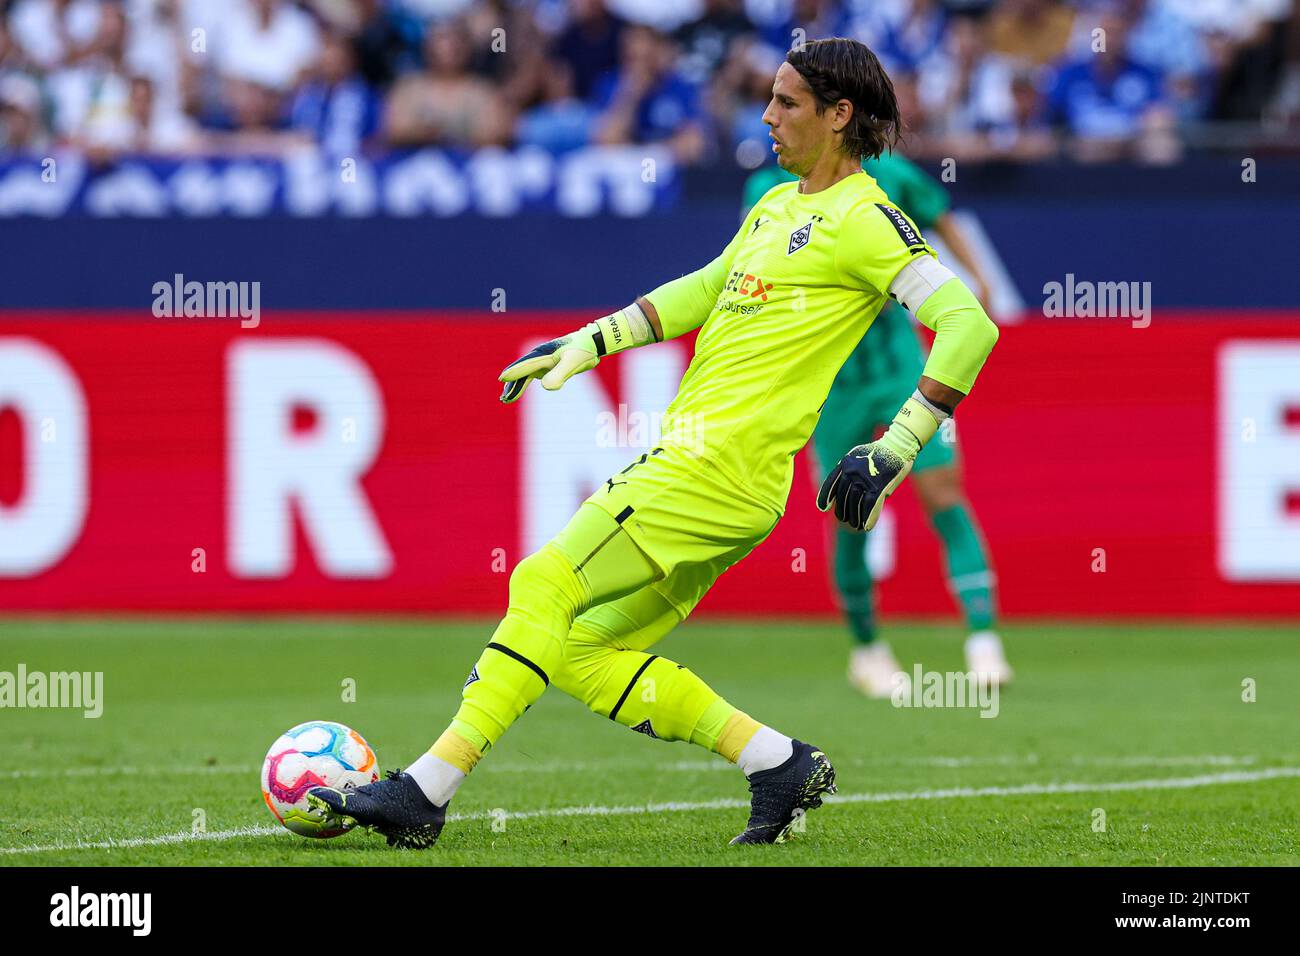 GELSENKIRCHEN, GERMANY - AUGUST 13: goalkeeper Yann Sommer of Borussia Monchengladbach during the German Bundesliga match between Schalke 04 and Borussia Monchengladbach at Veltins Arena on August 13, 2022 in Gelsenkirchen, Germany (Photo by Marcel ter Bals/Orange Pictures) Stock Photo